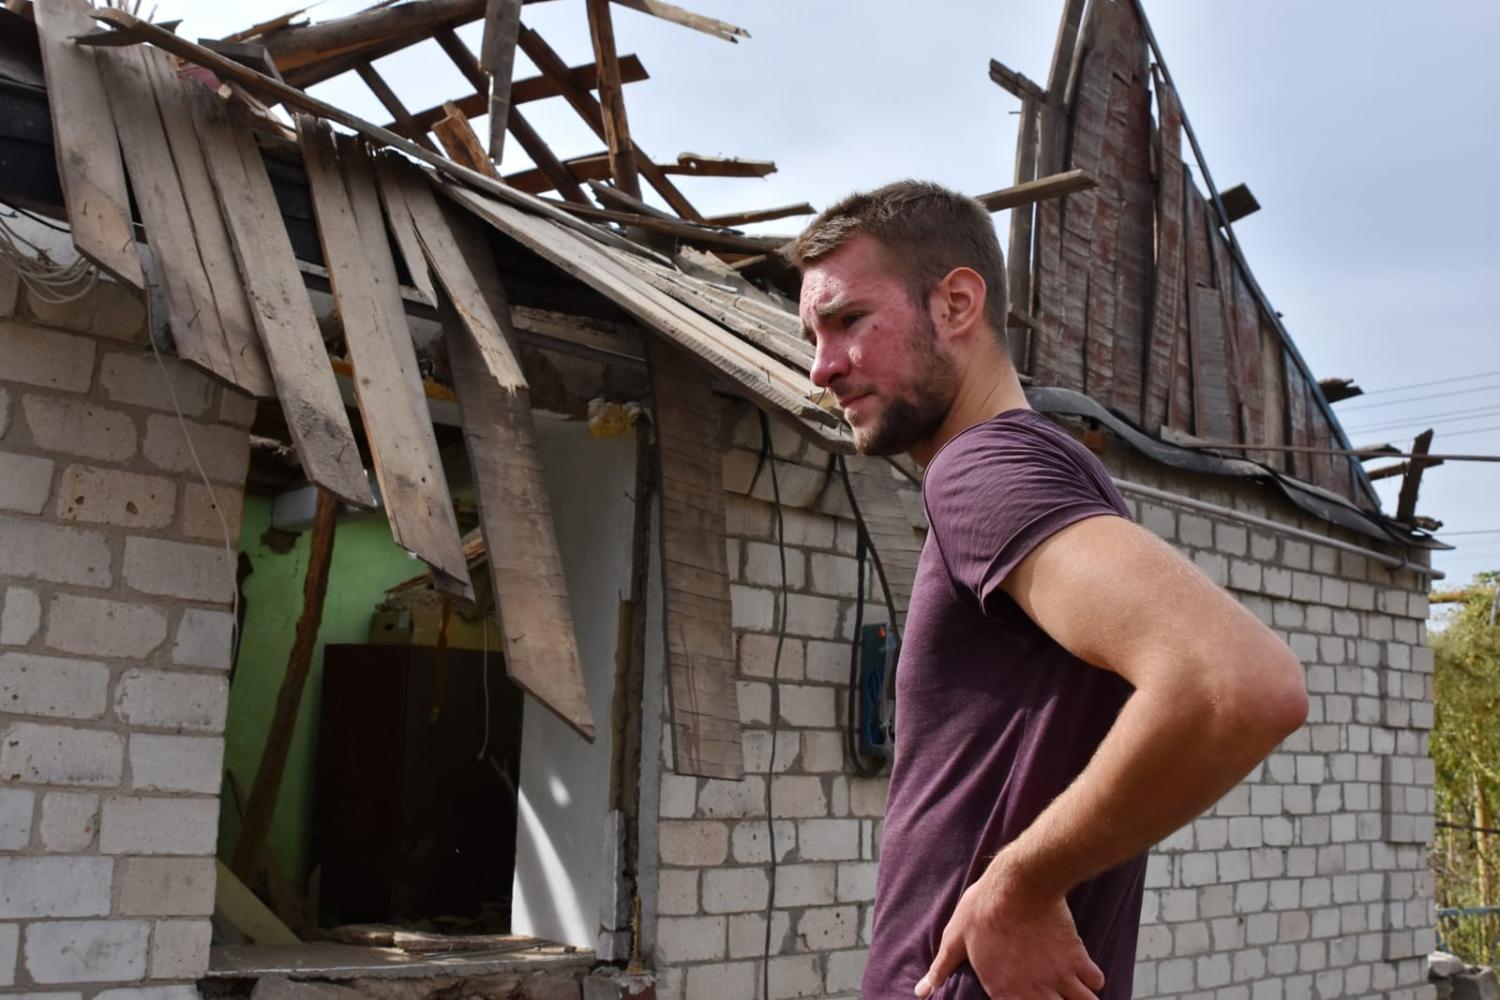 A man looks at the damage to his house in the village of Bilenke, Ukraine, following Russian shelling in Zaporizhzhia region this month (Andriy Andriyenko via Getty Images)